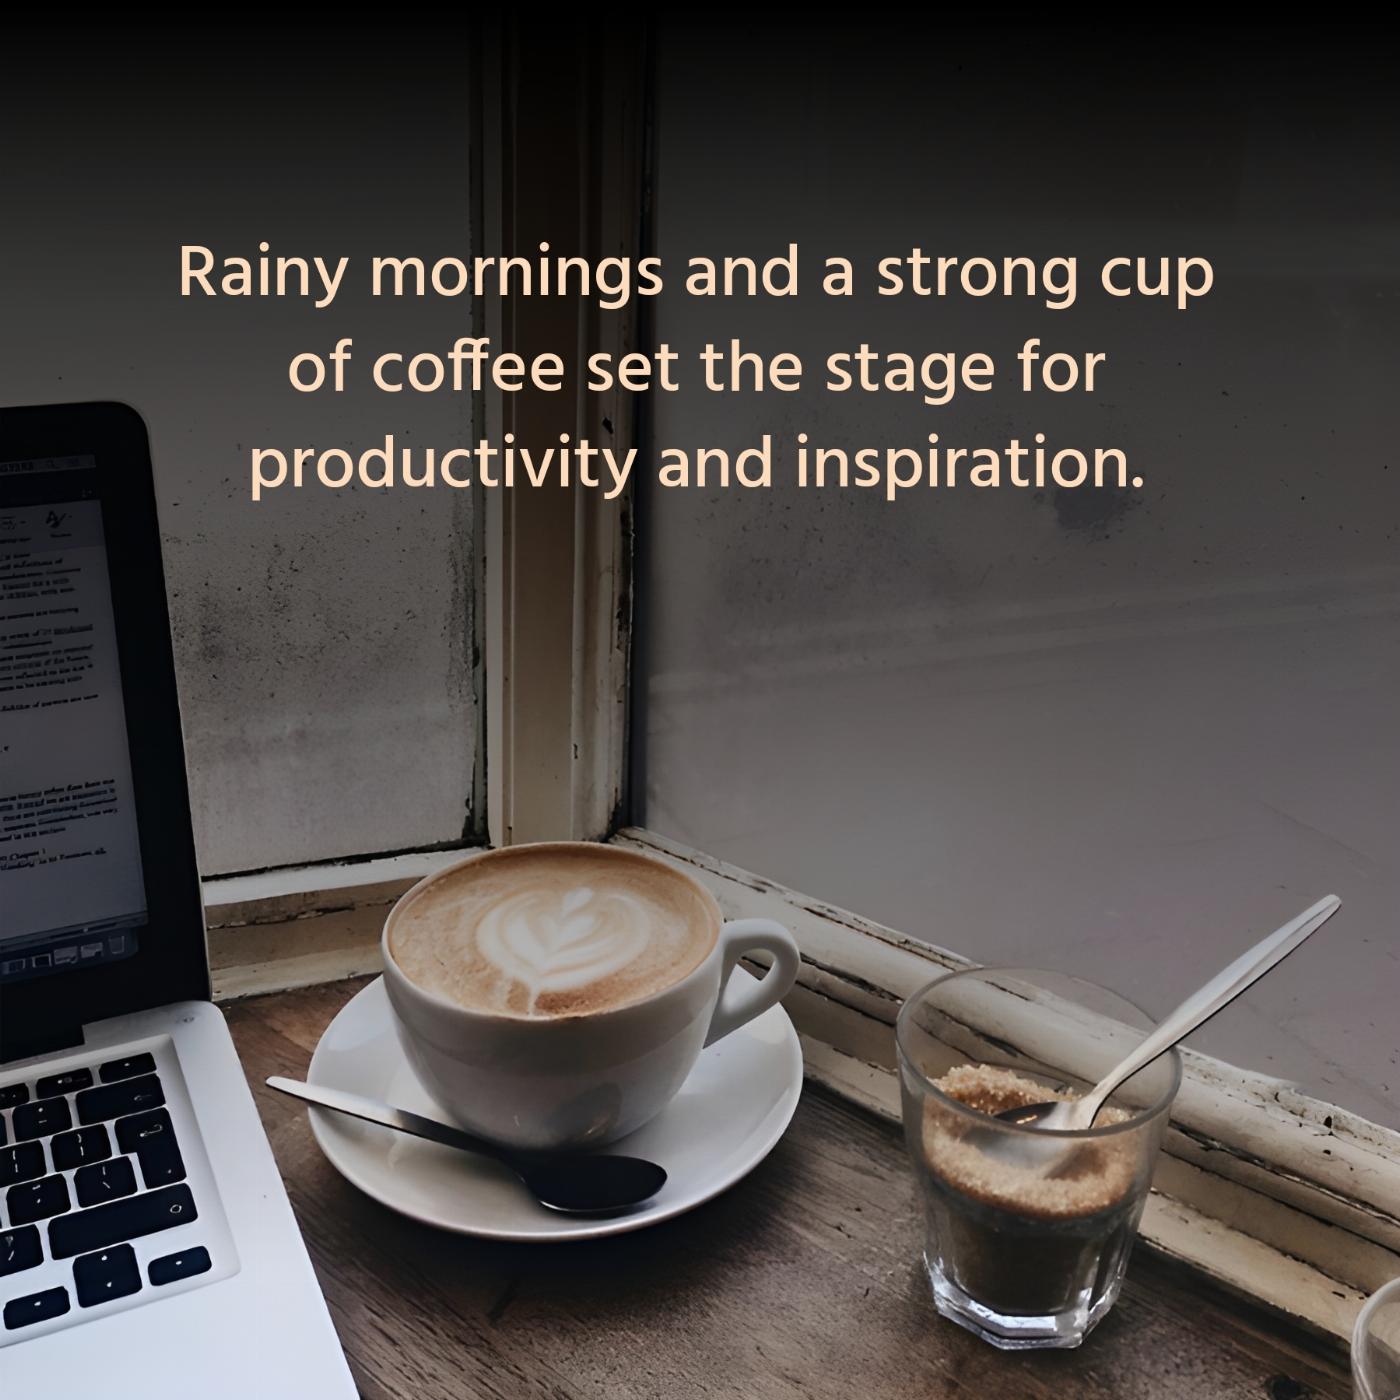 Rainy mornings and a strong cup of coffee set the stage